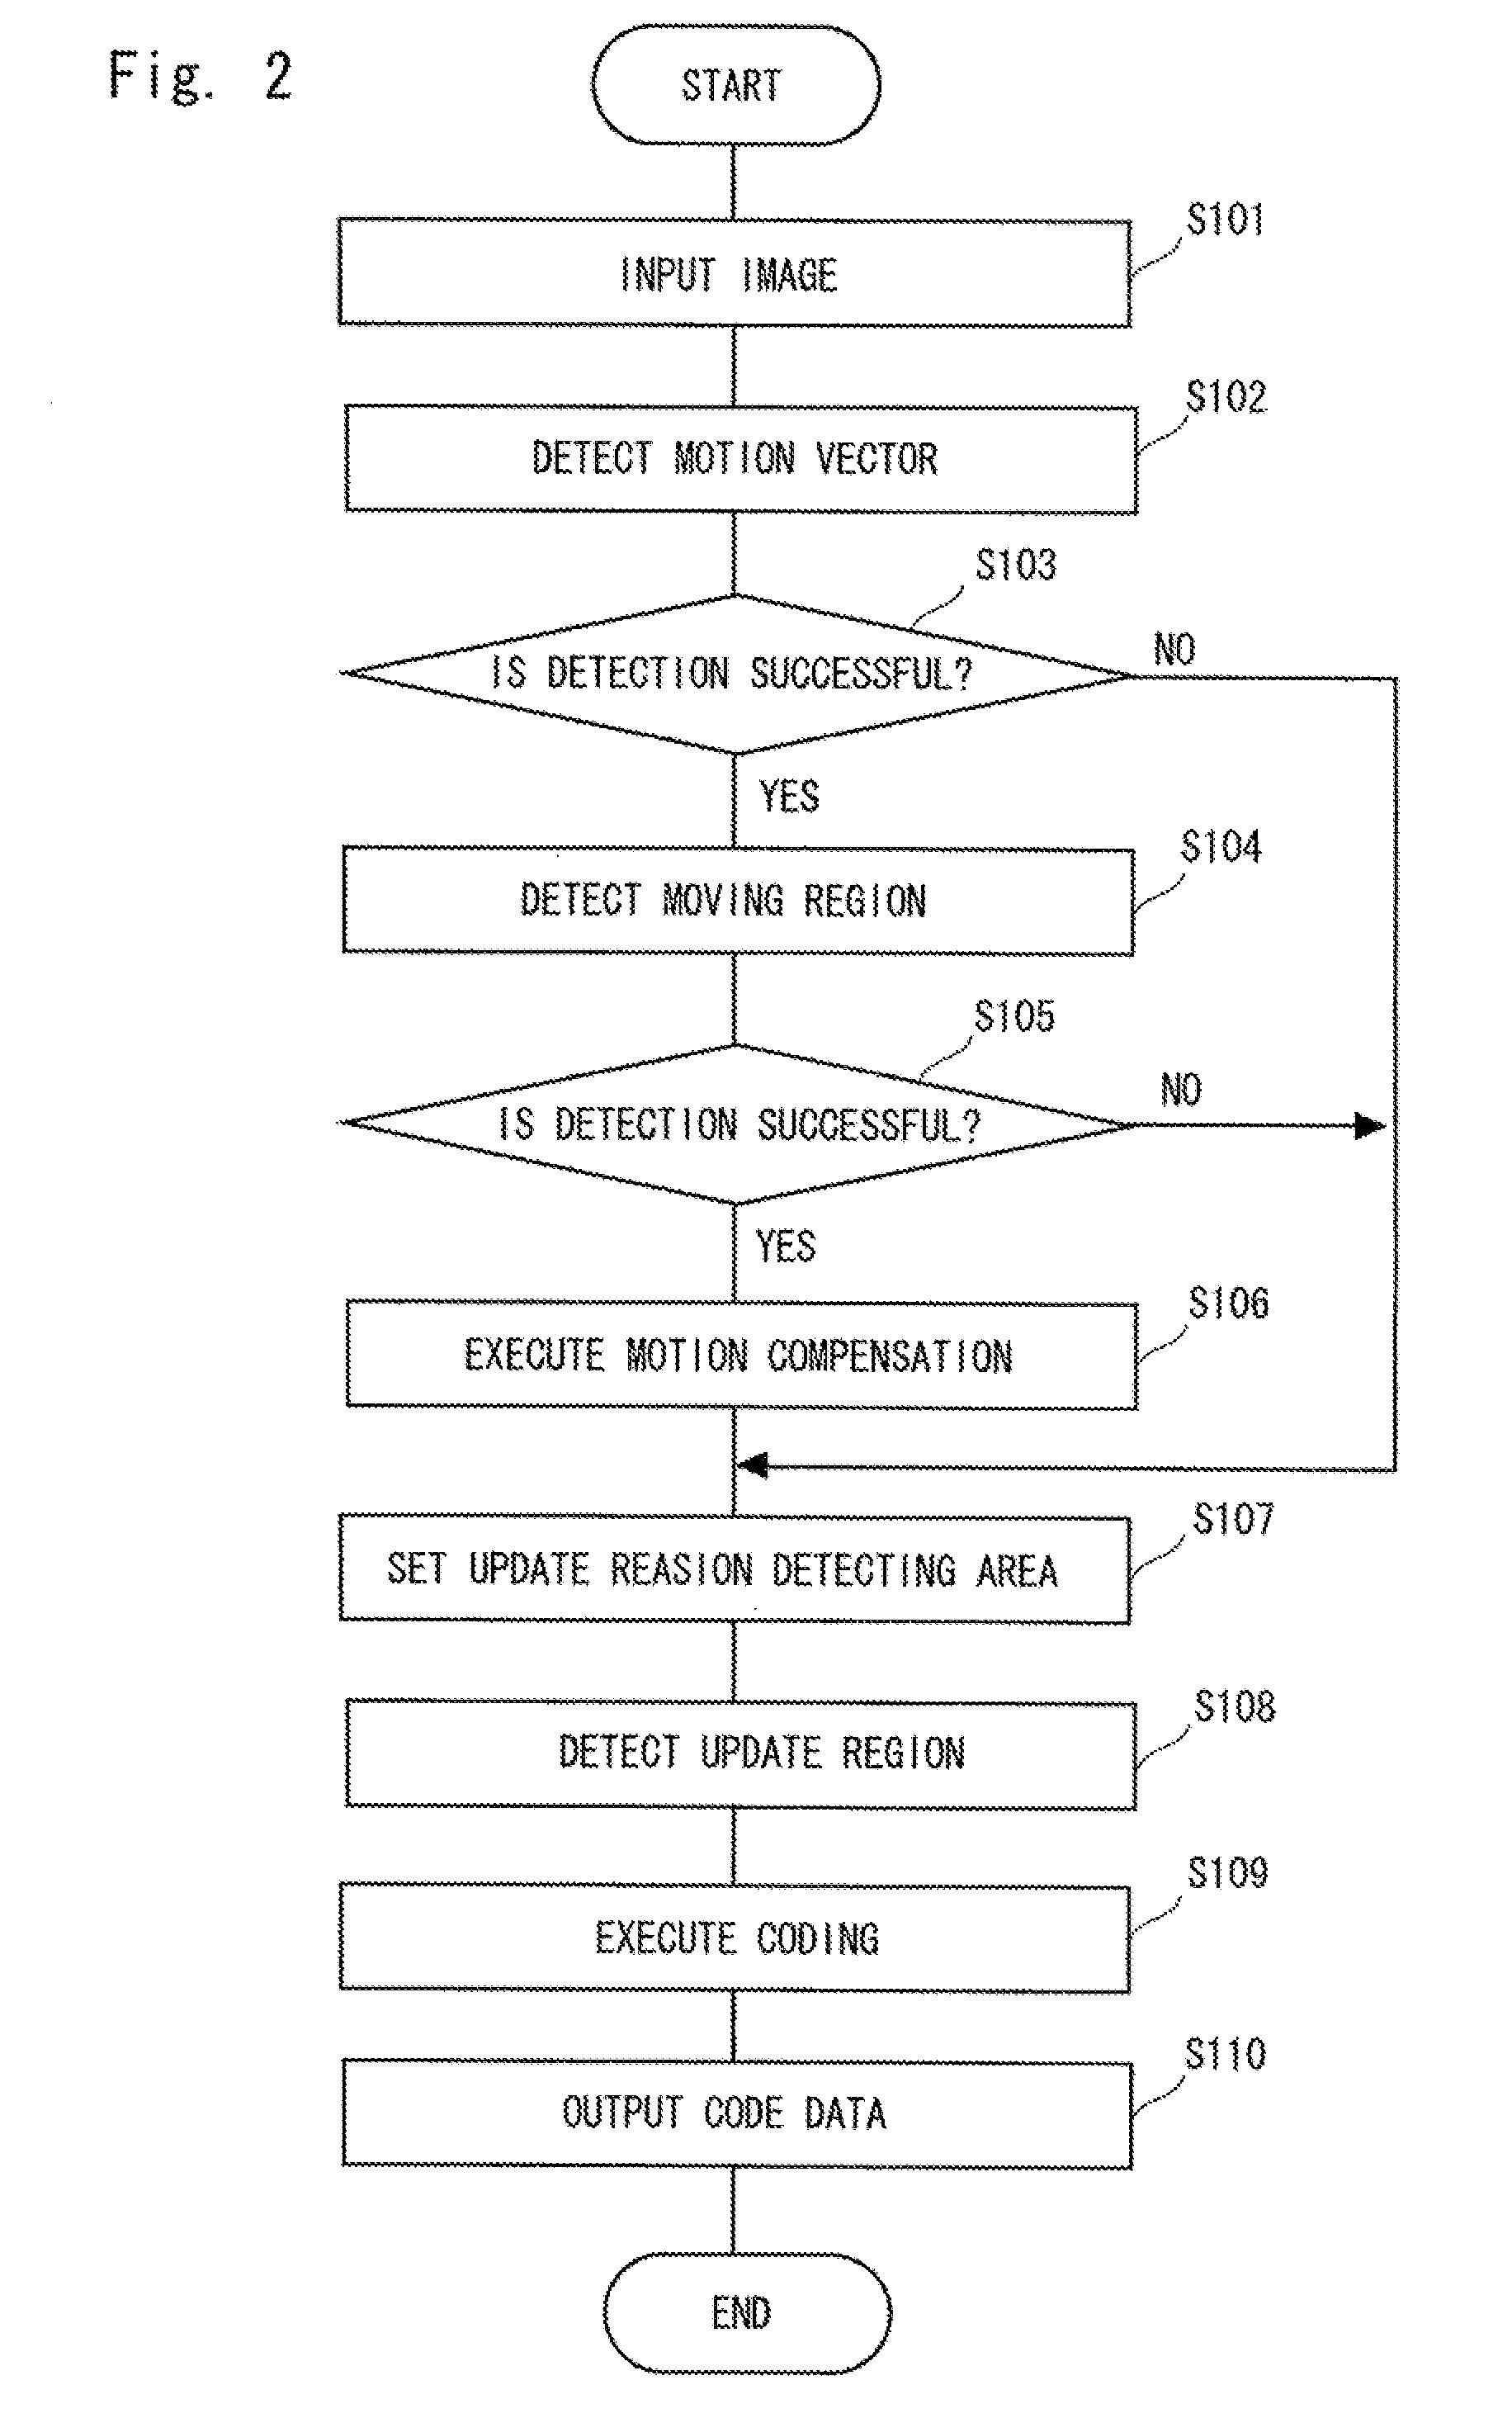 Motion vector detection device